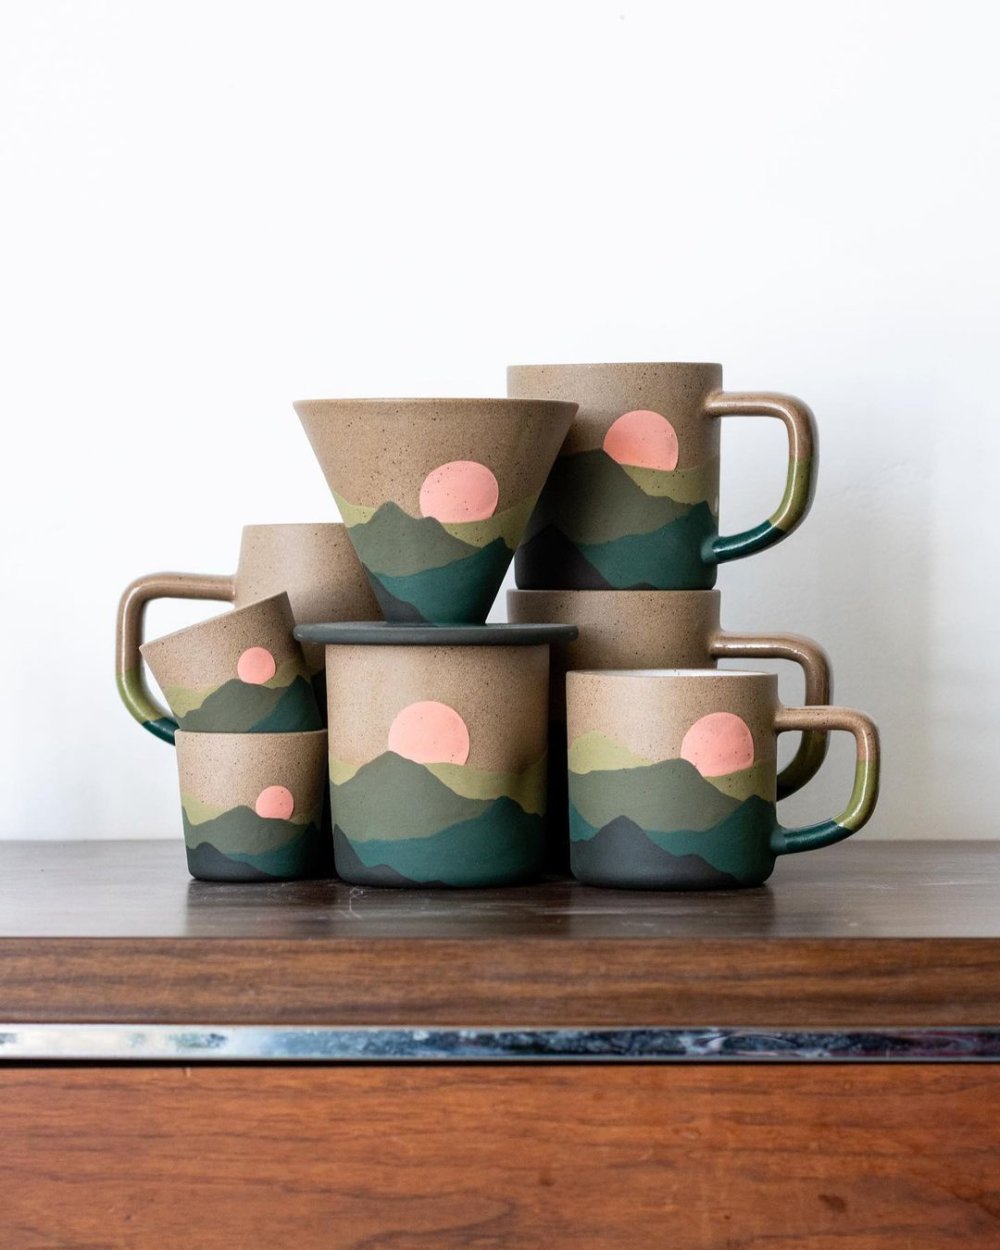 Gorgeous Handmade Ceramic Mugs Kettle And Bowls That Illustrate Magical Landscapes By Callahan Ceramics 1